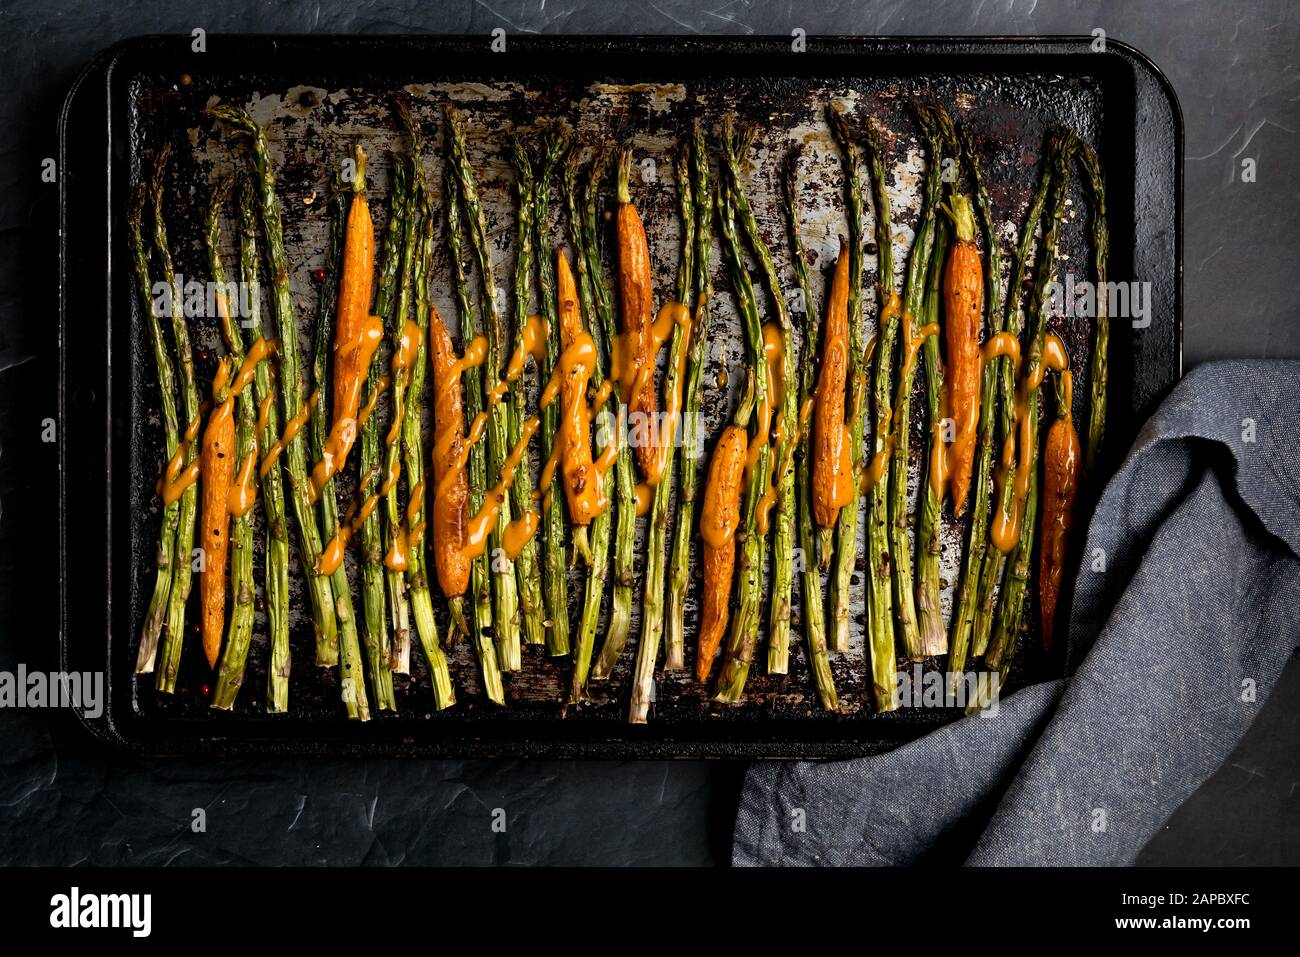 A top down view of a baking sheet with oven roasted asparagus and baby carrots drizzled with sauce. Stock Photo